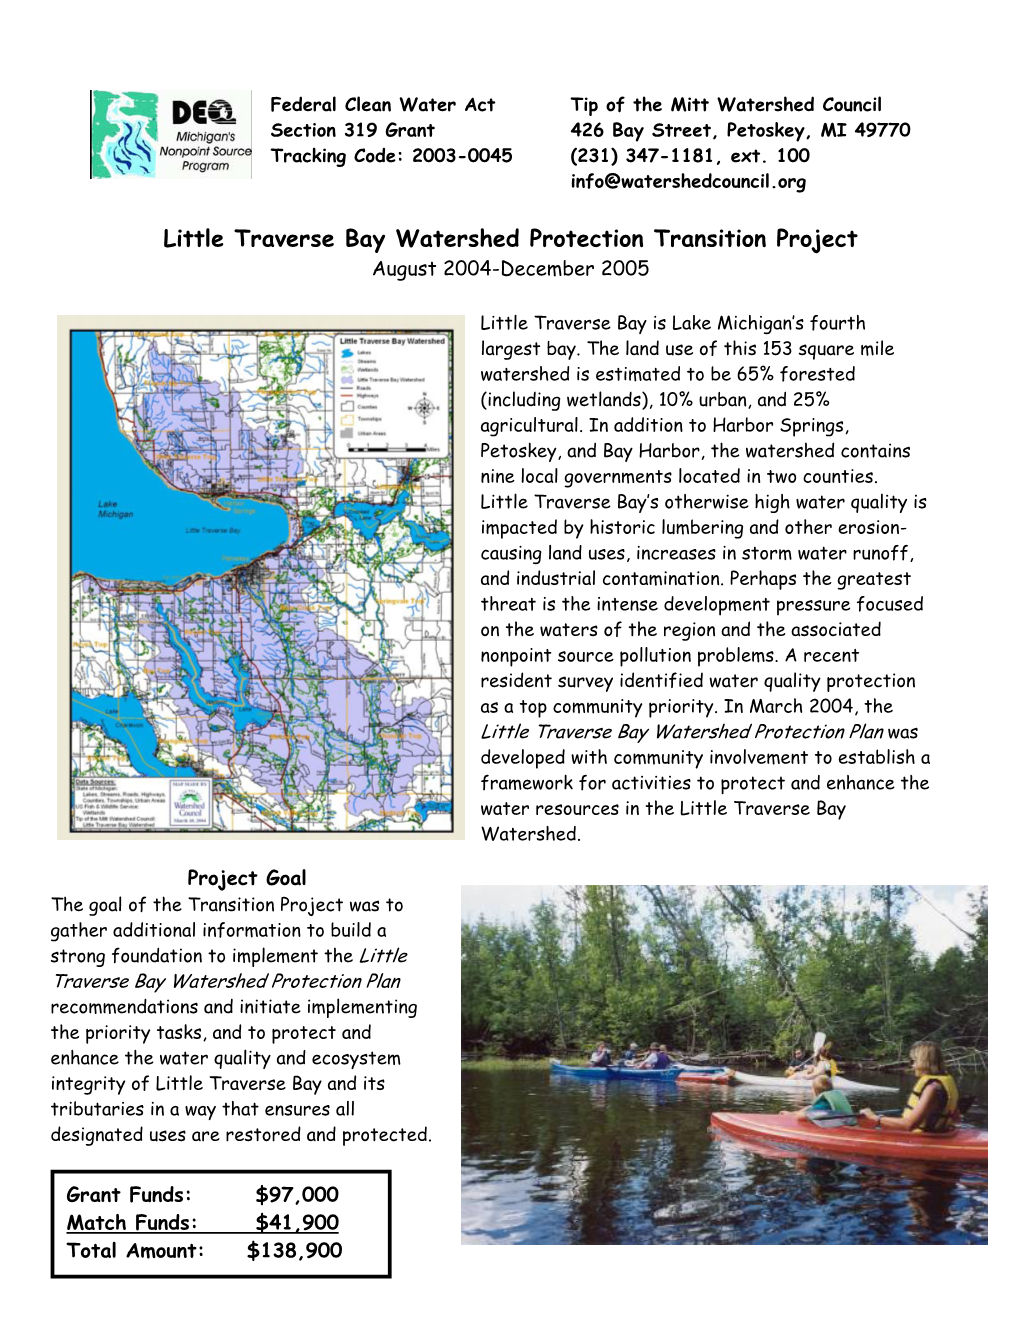 Little Traverse Bay Watershed Protection Transition Project August 2004-December 2005